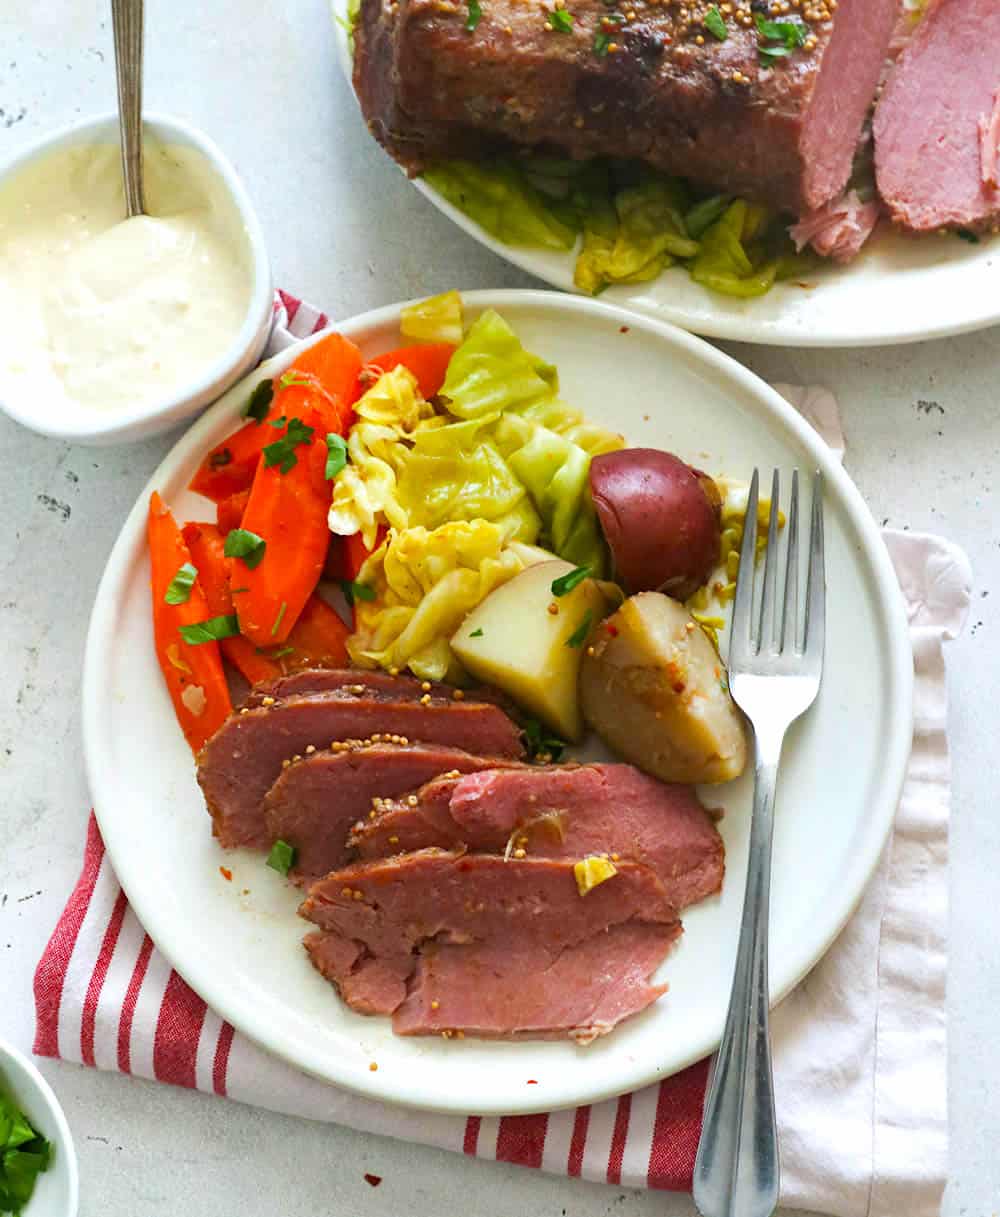 Enjoy Instant Pot corned beef with potatoes and cabbage on St. Patrick's Day or New Year's Day